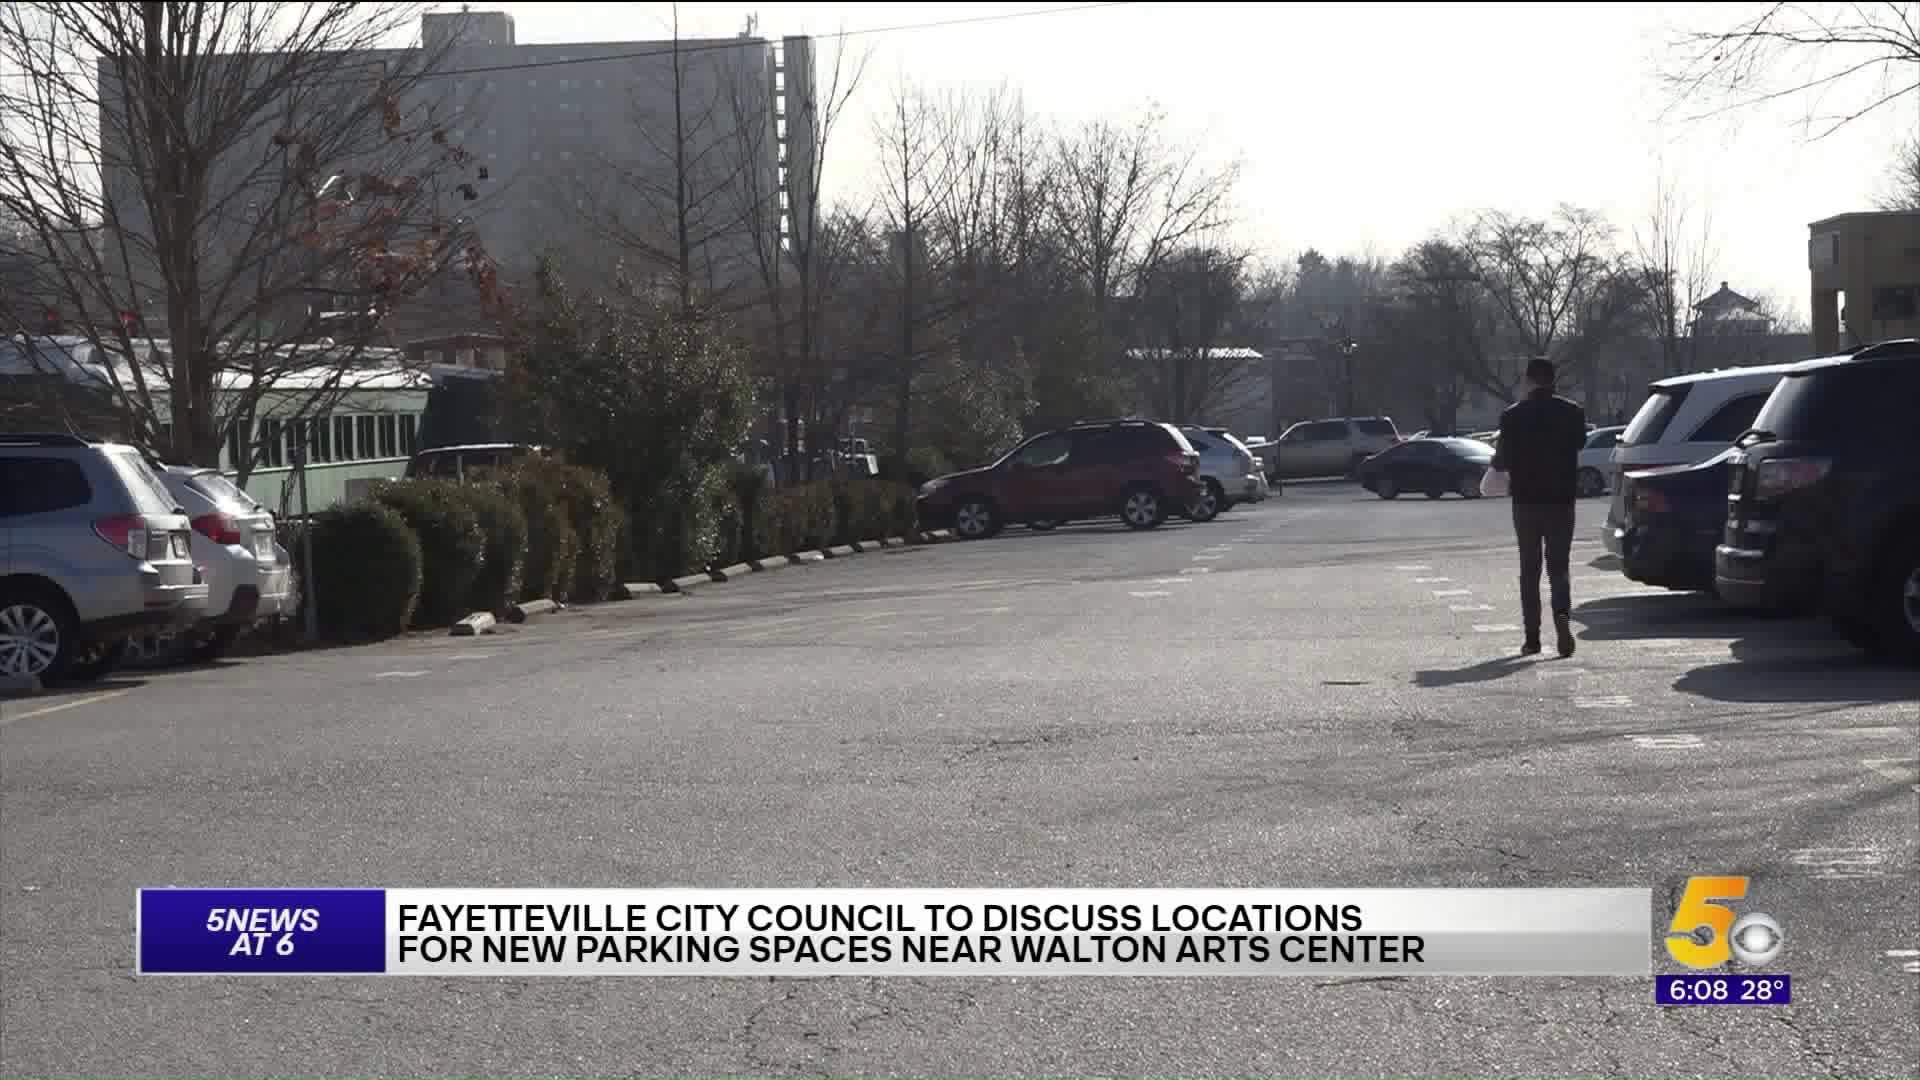 Fayetteville City Council to Discuss New Downtown Parking